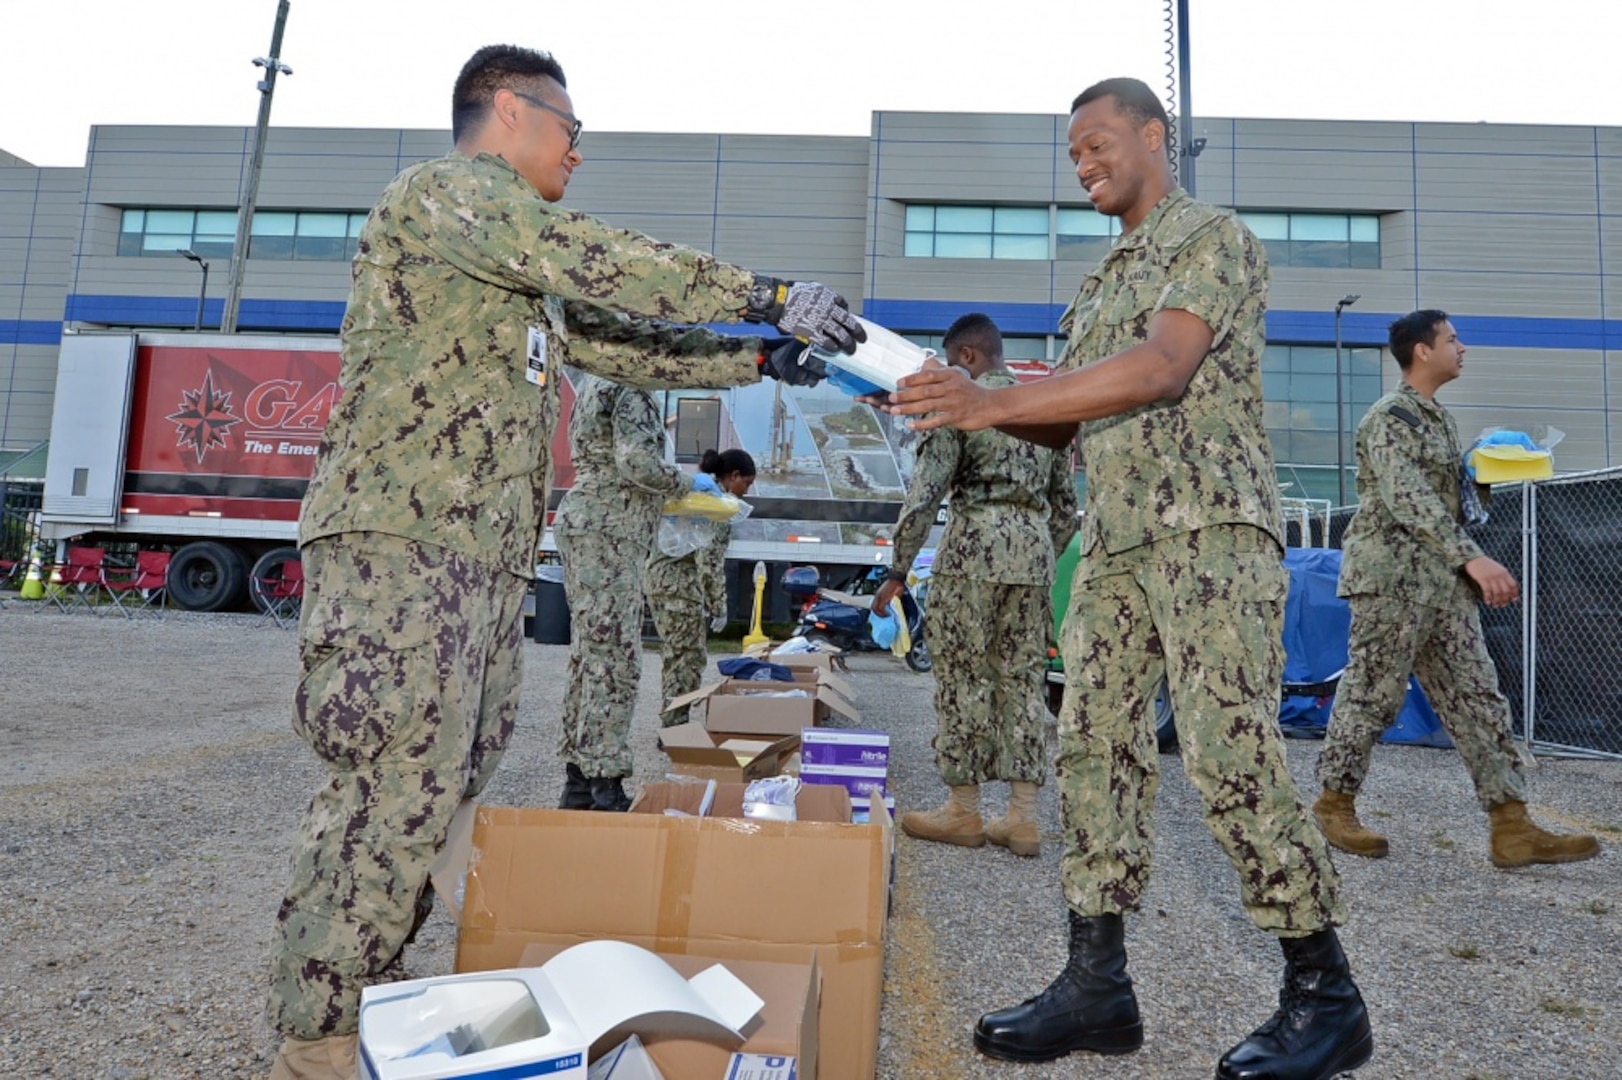 Sailors in Navy warfare uniforms receive packages of personal protective equipment in a line.